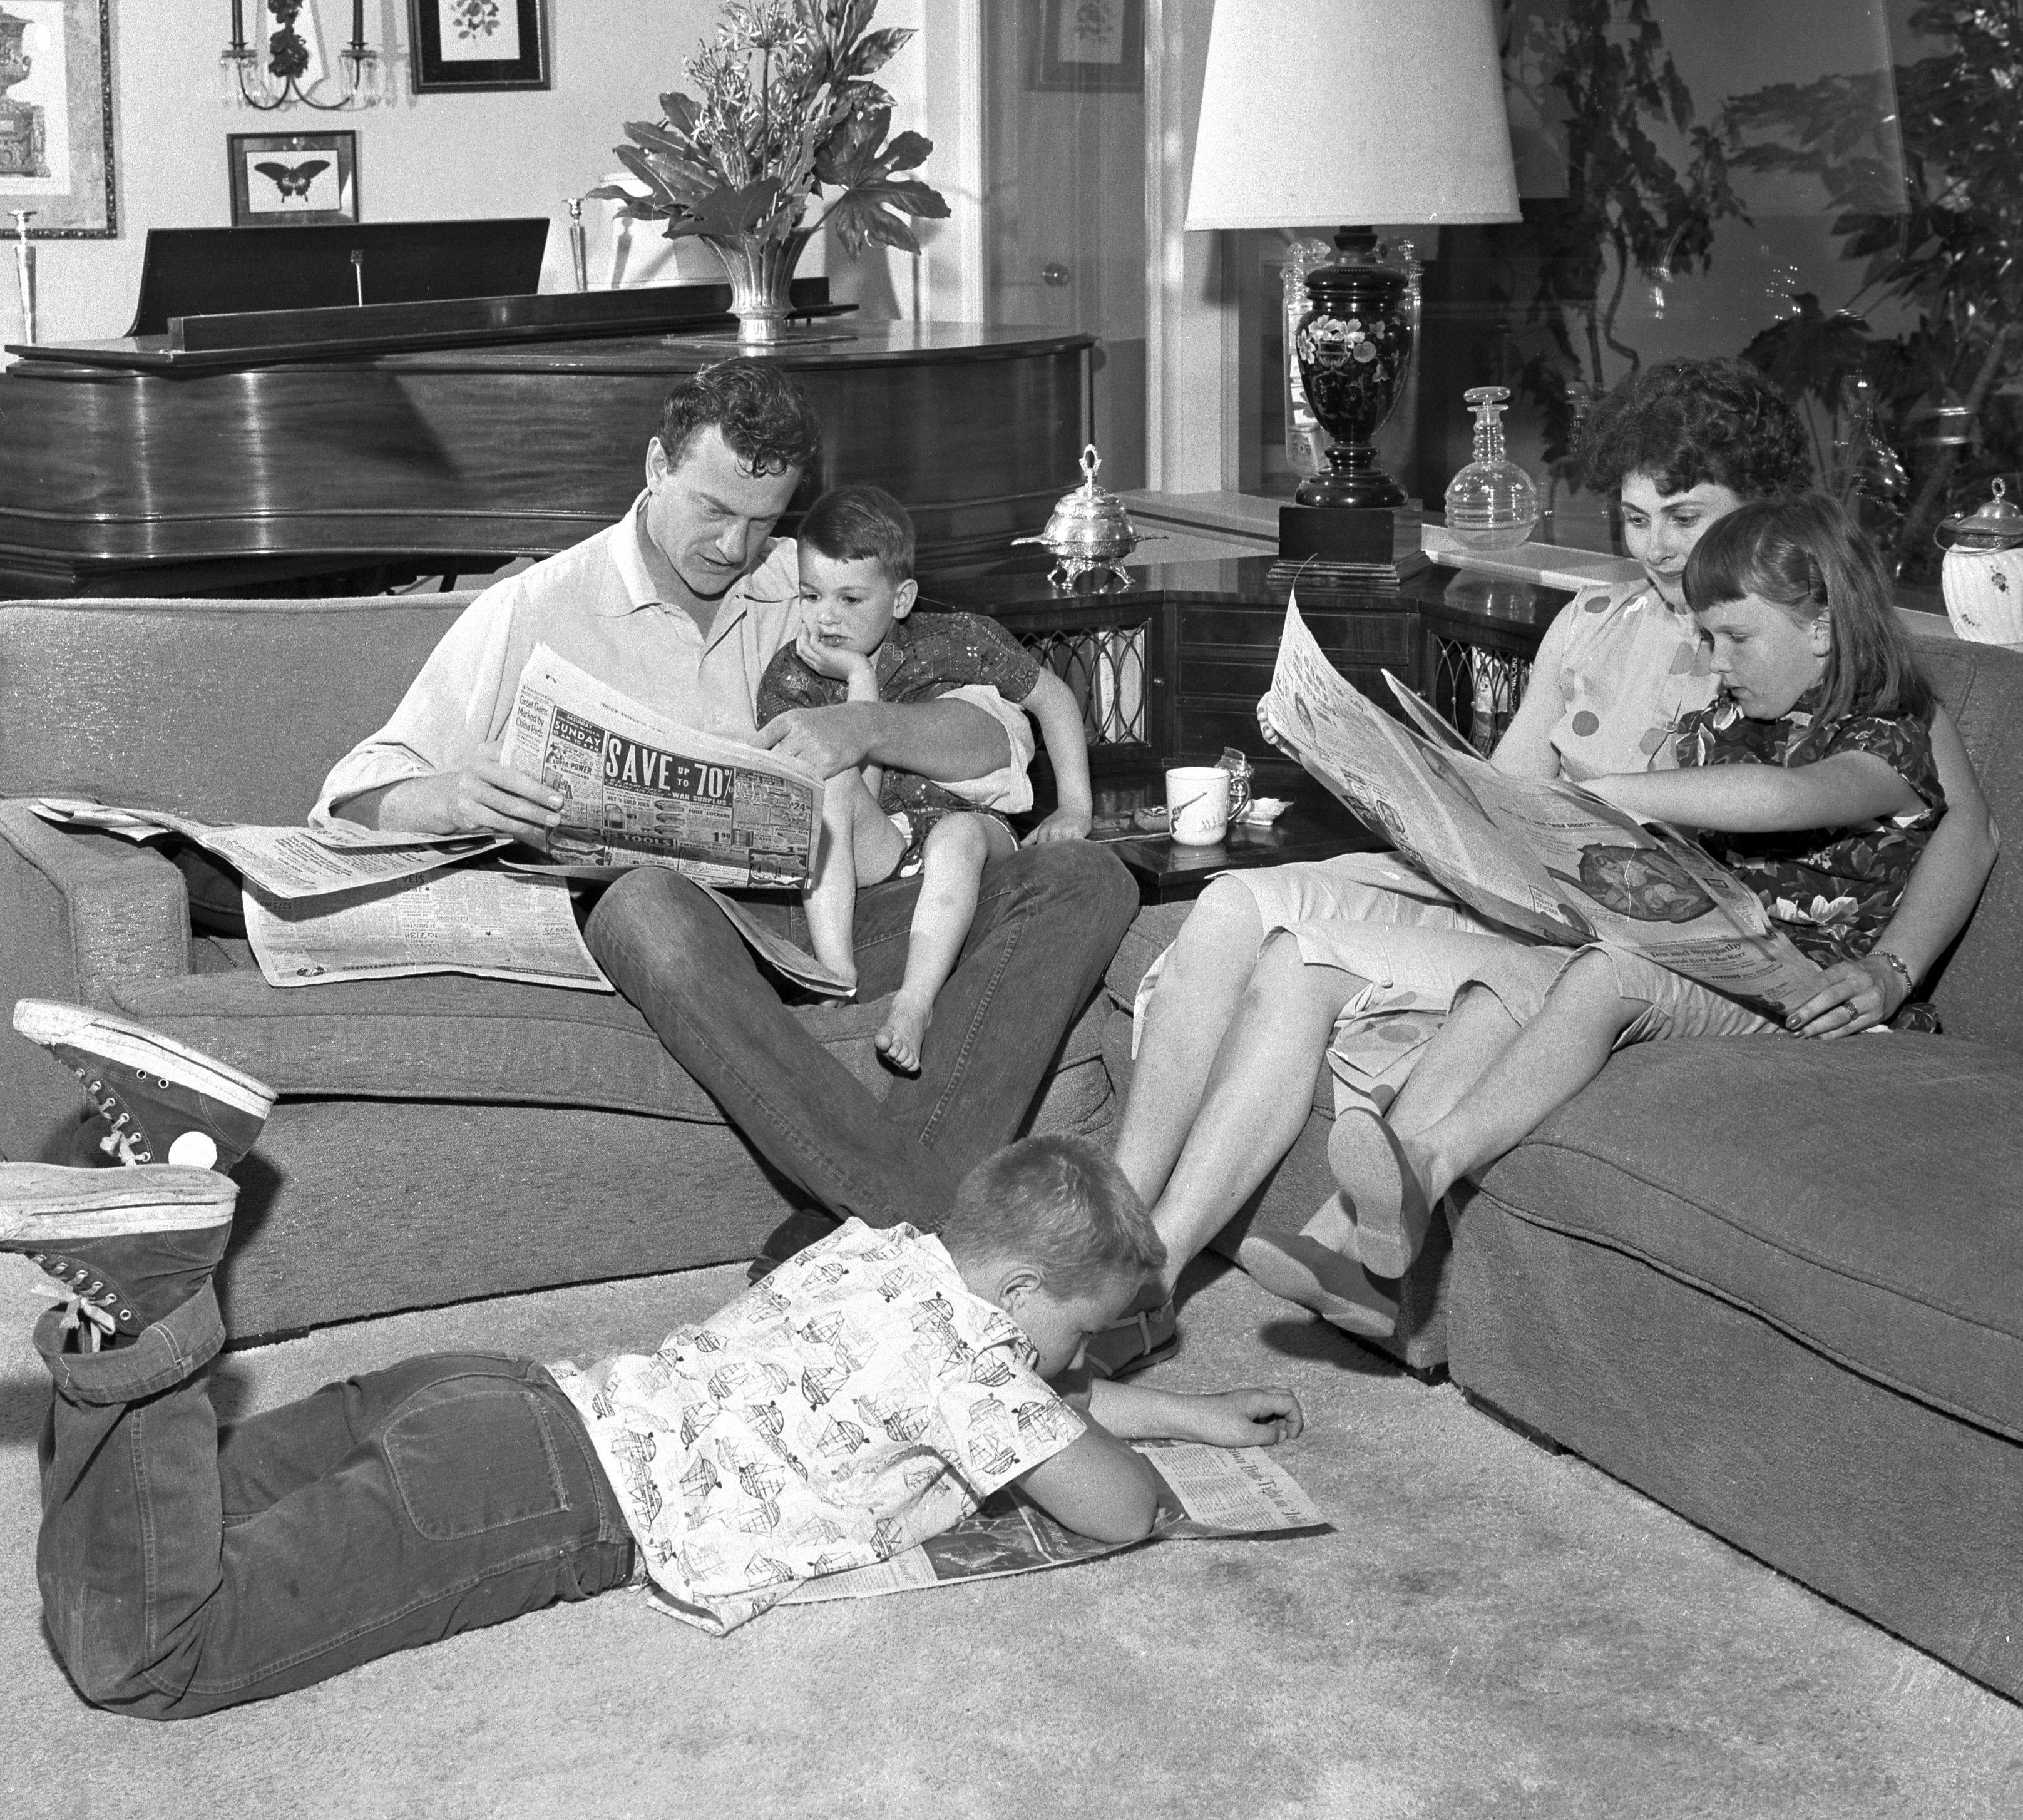 The Arness family at home. James Arness with Rolf (age 5), Virginia with daughter Jenny Lee (age 8) and Craig (age 10) on the floor on May 4, 1957. | Source: Getty Images